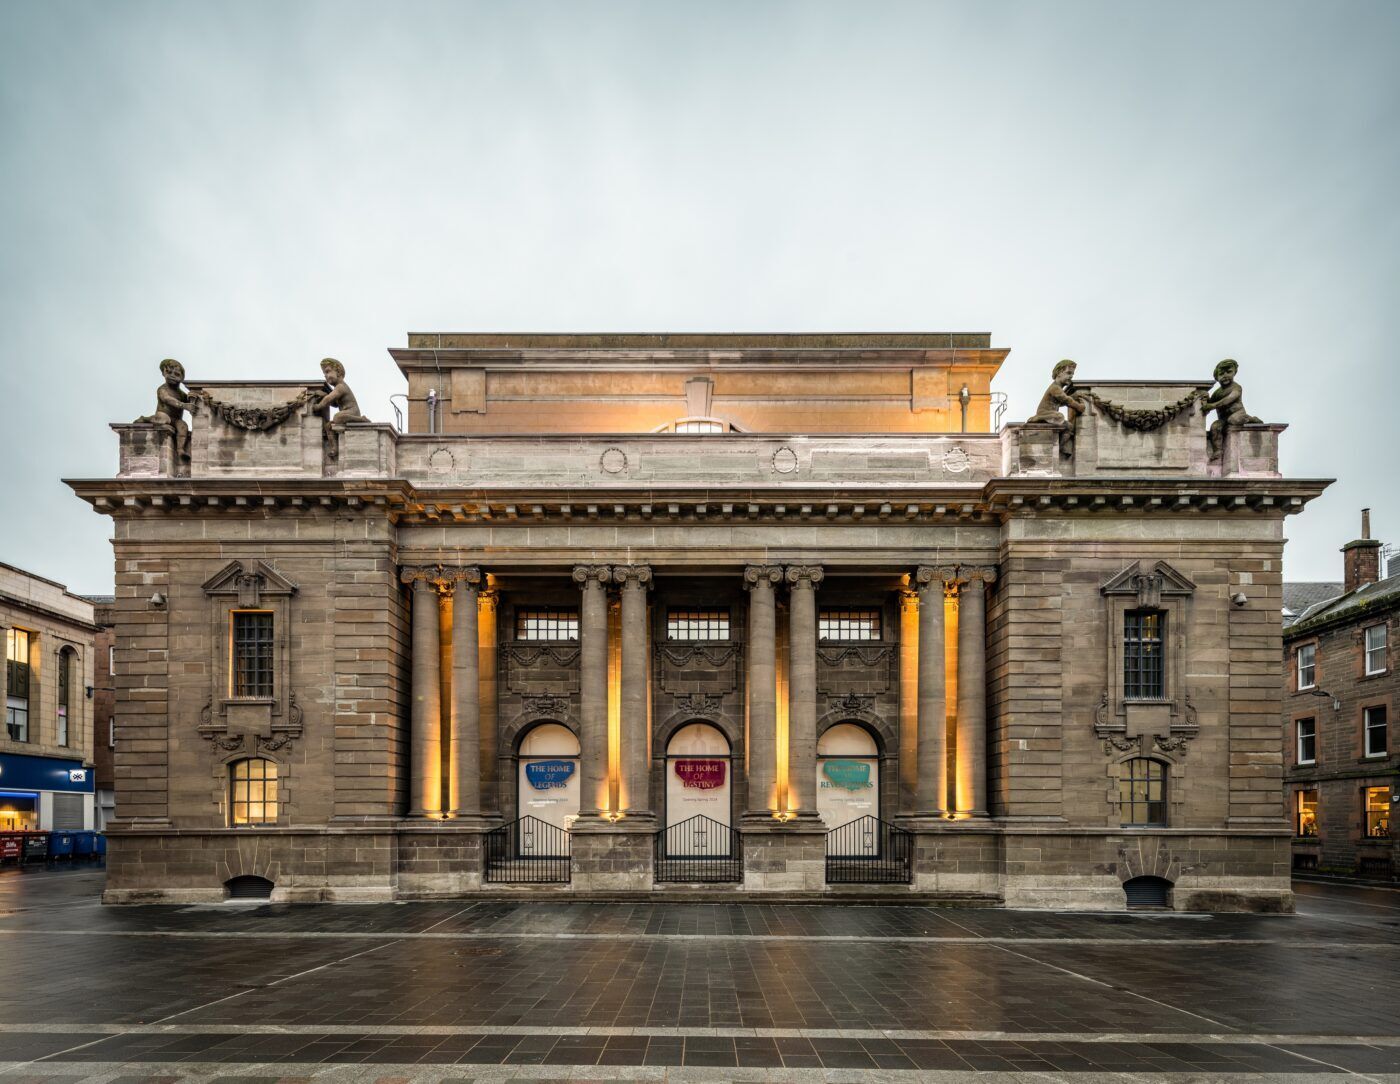 The front entrance of the new Perth Museum (formerly Perth City Hall)